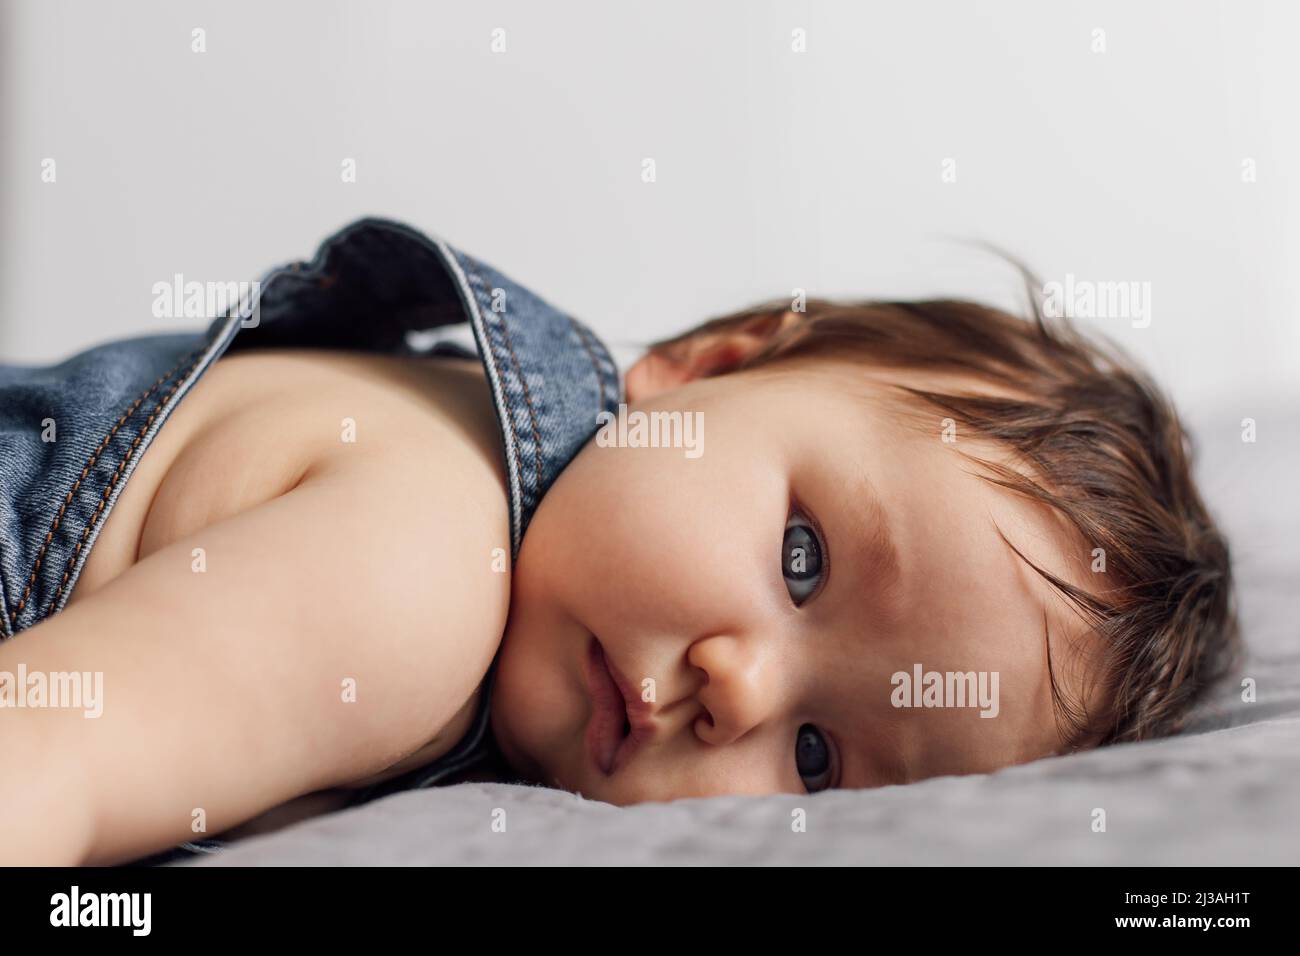 Portrait of pretty baby wearing denim romper lying on gray blanket at home. Tired blue eyed infant child rest on bed in bedroom, white background Stock Photo